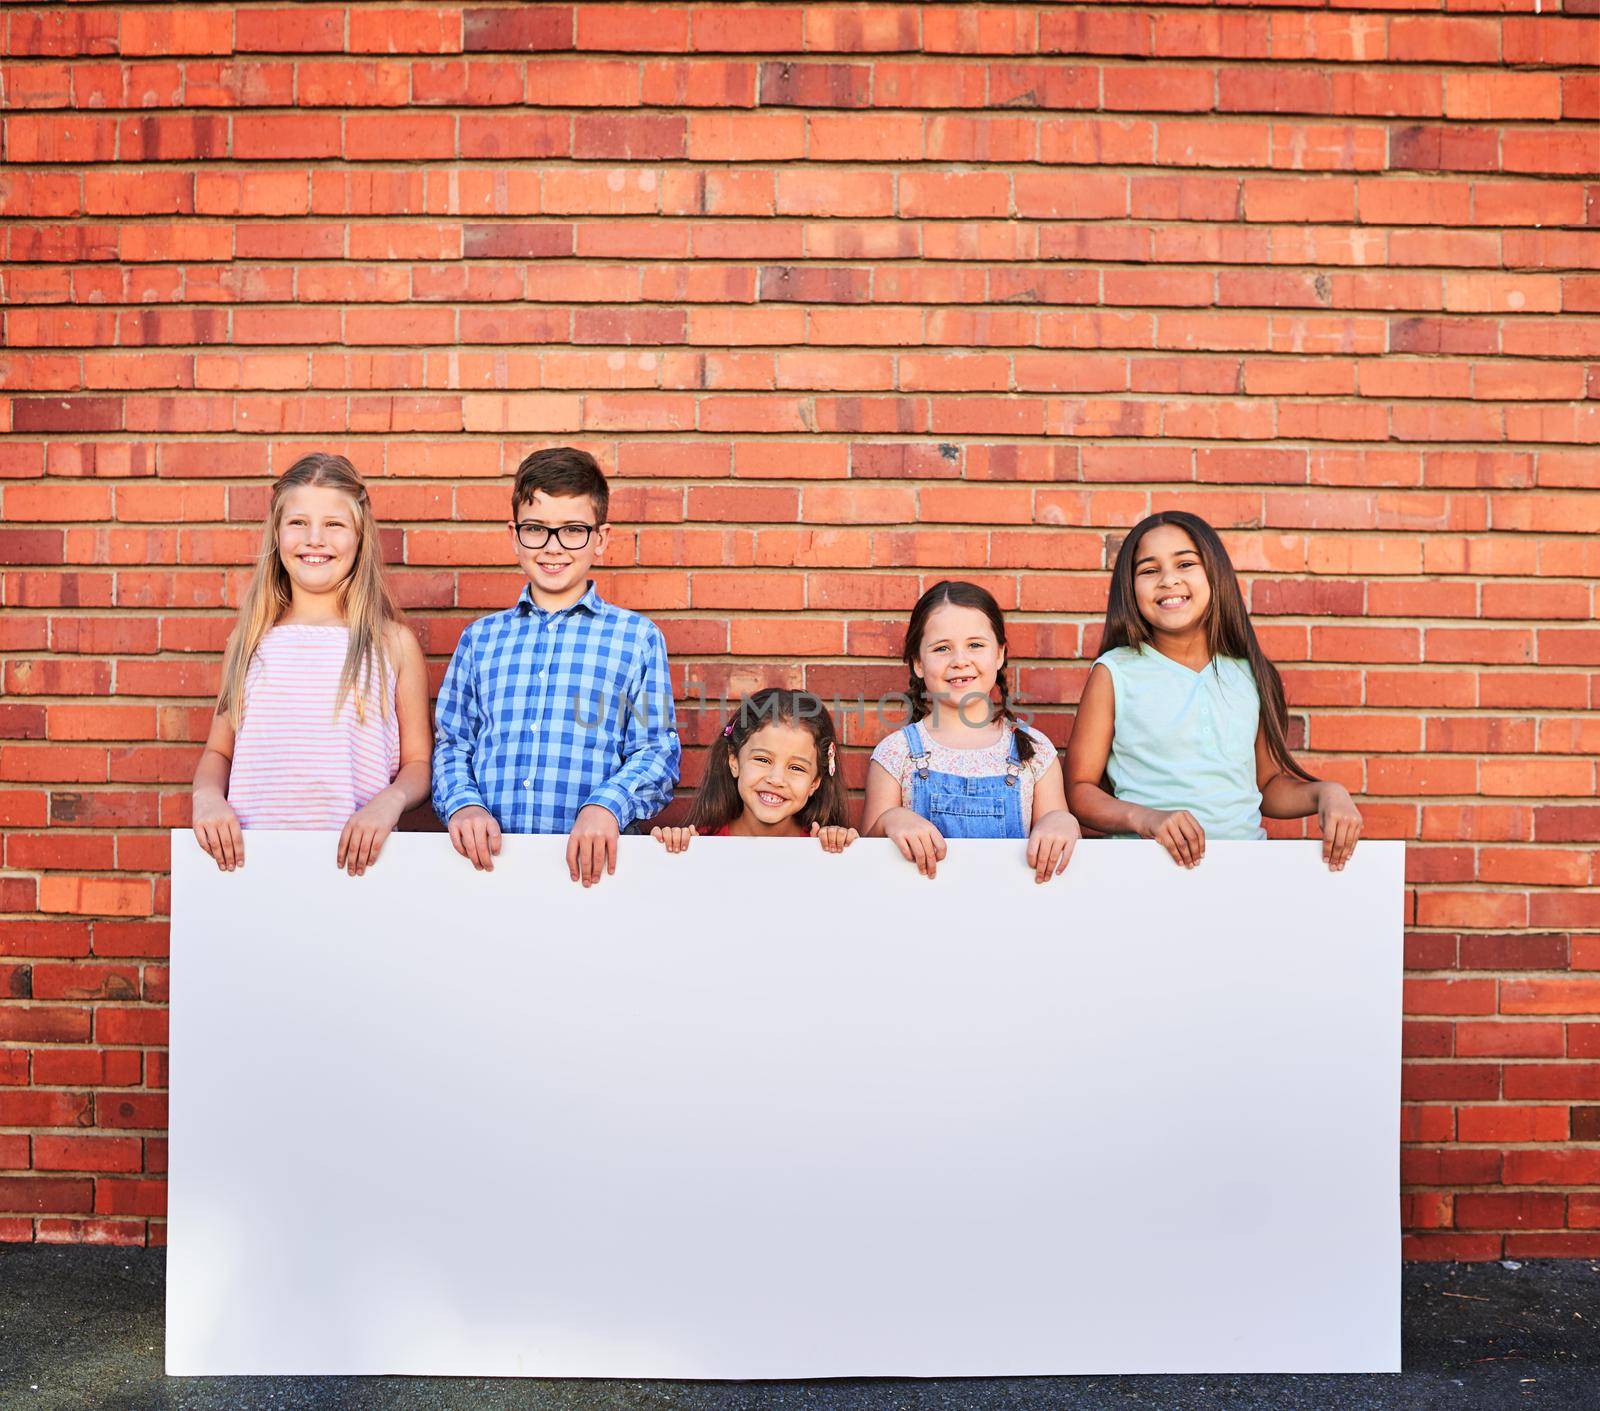 Well use our cuteness to help promote your message. Portrait of a group of young children holding a blank sign against a brick wall. by YuriArcurs